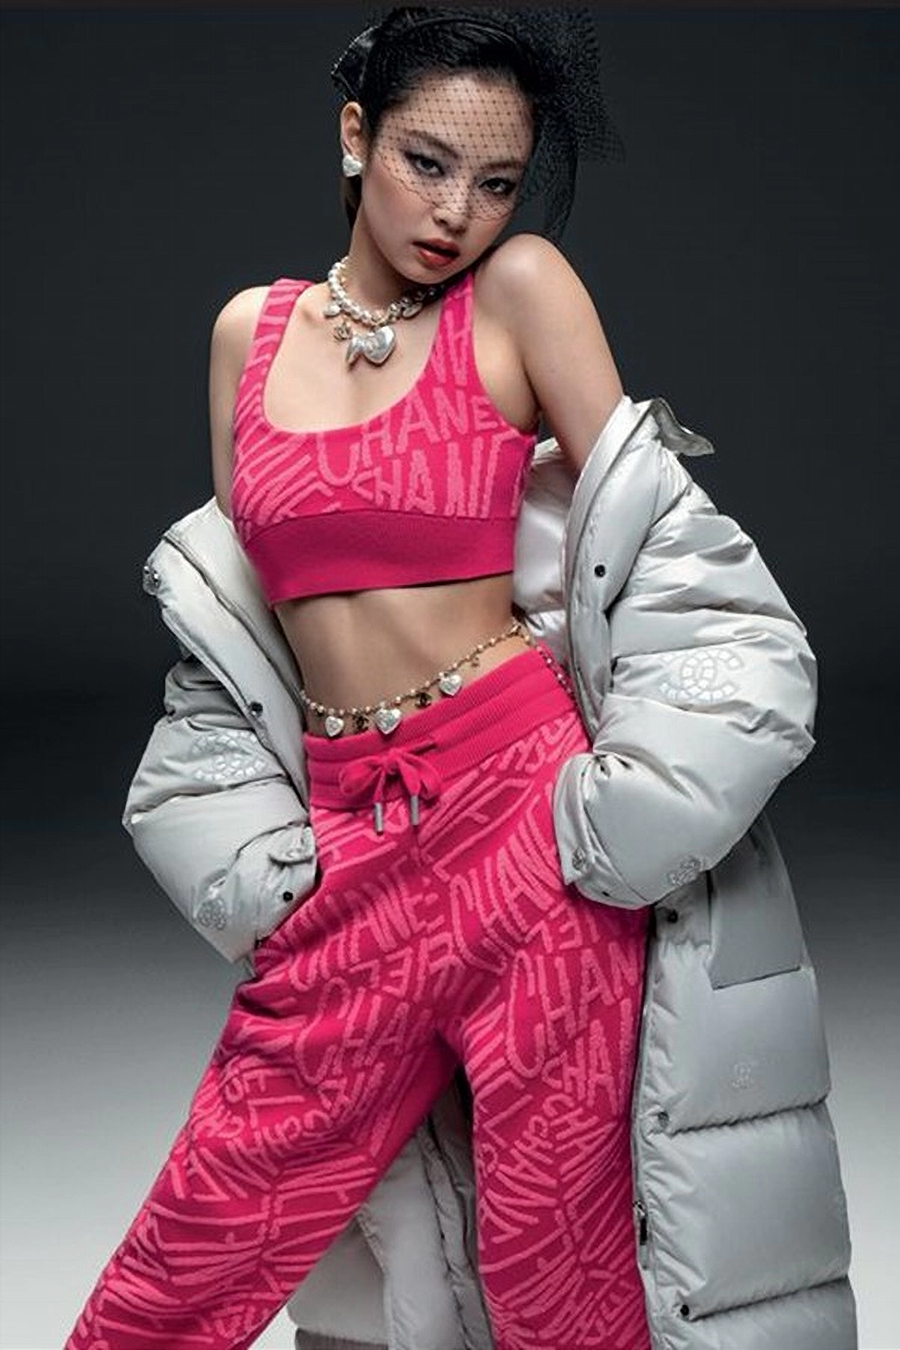 Chanel Ambassador Jennie Kim in a red crop top and skirt at Chanel